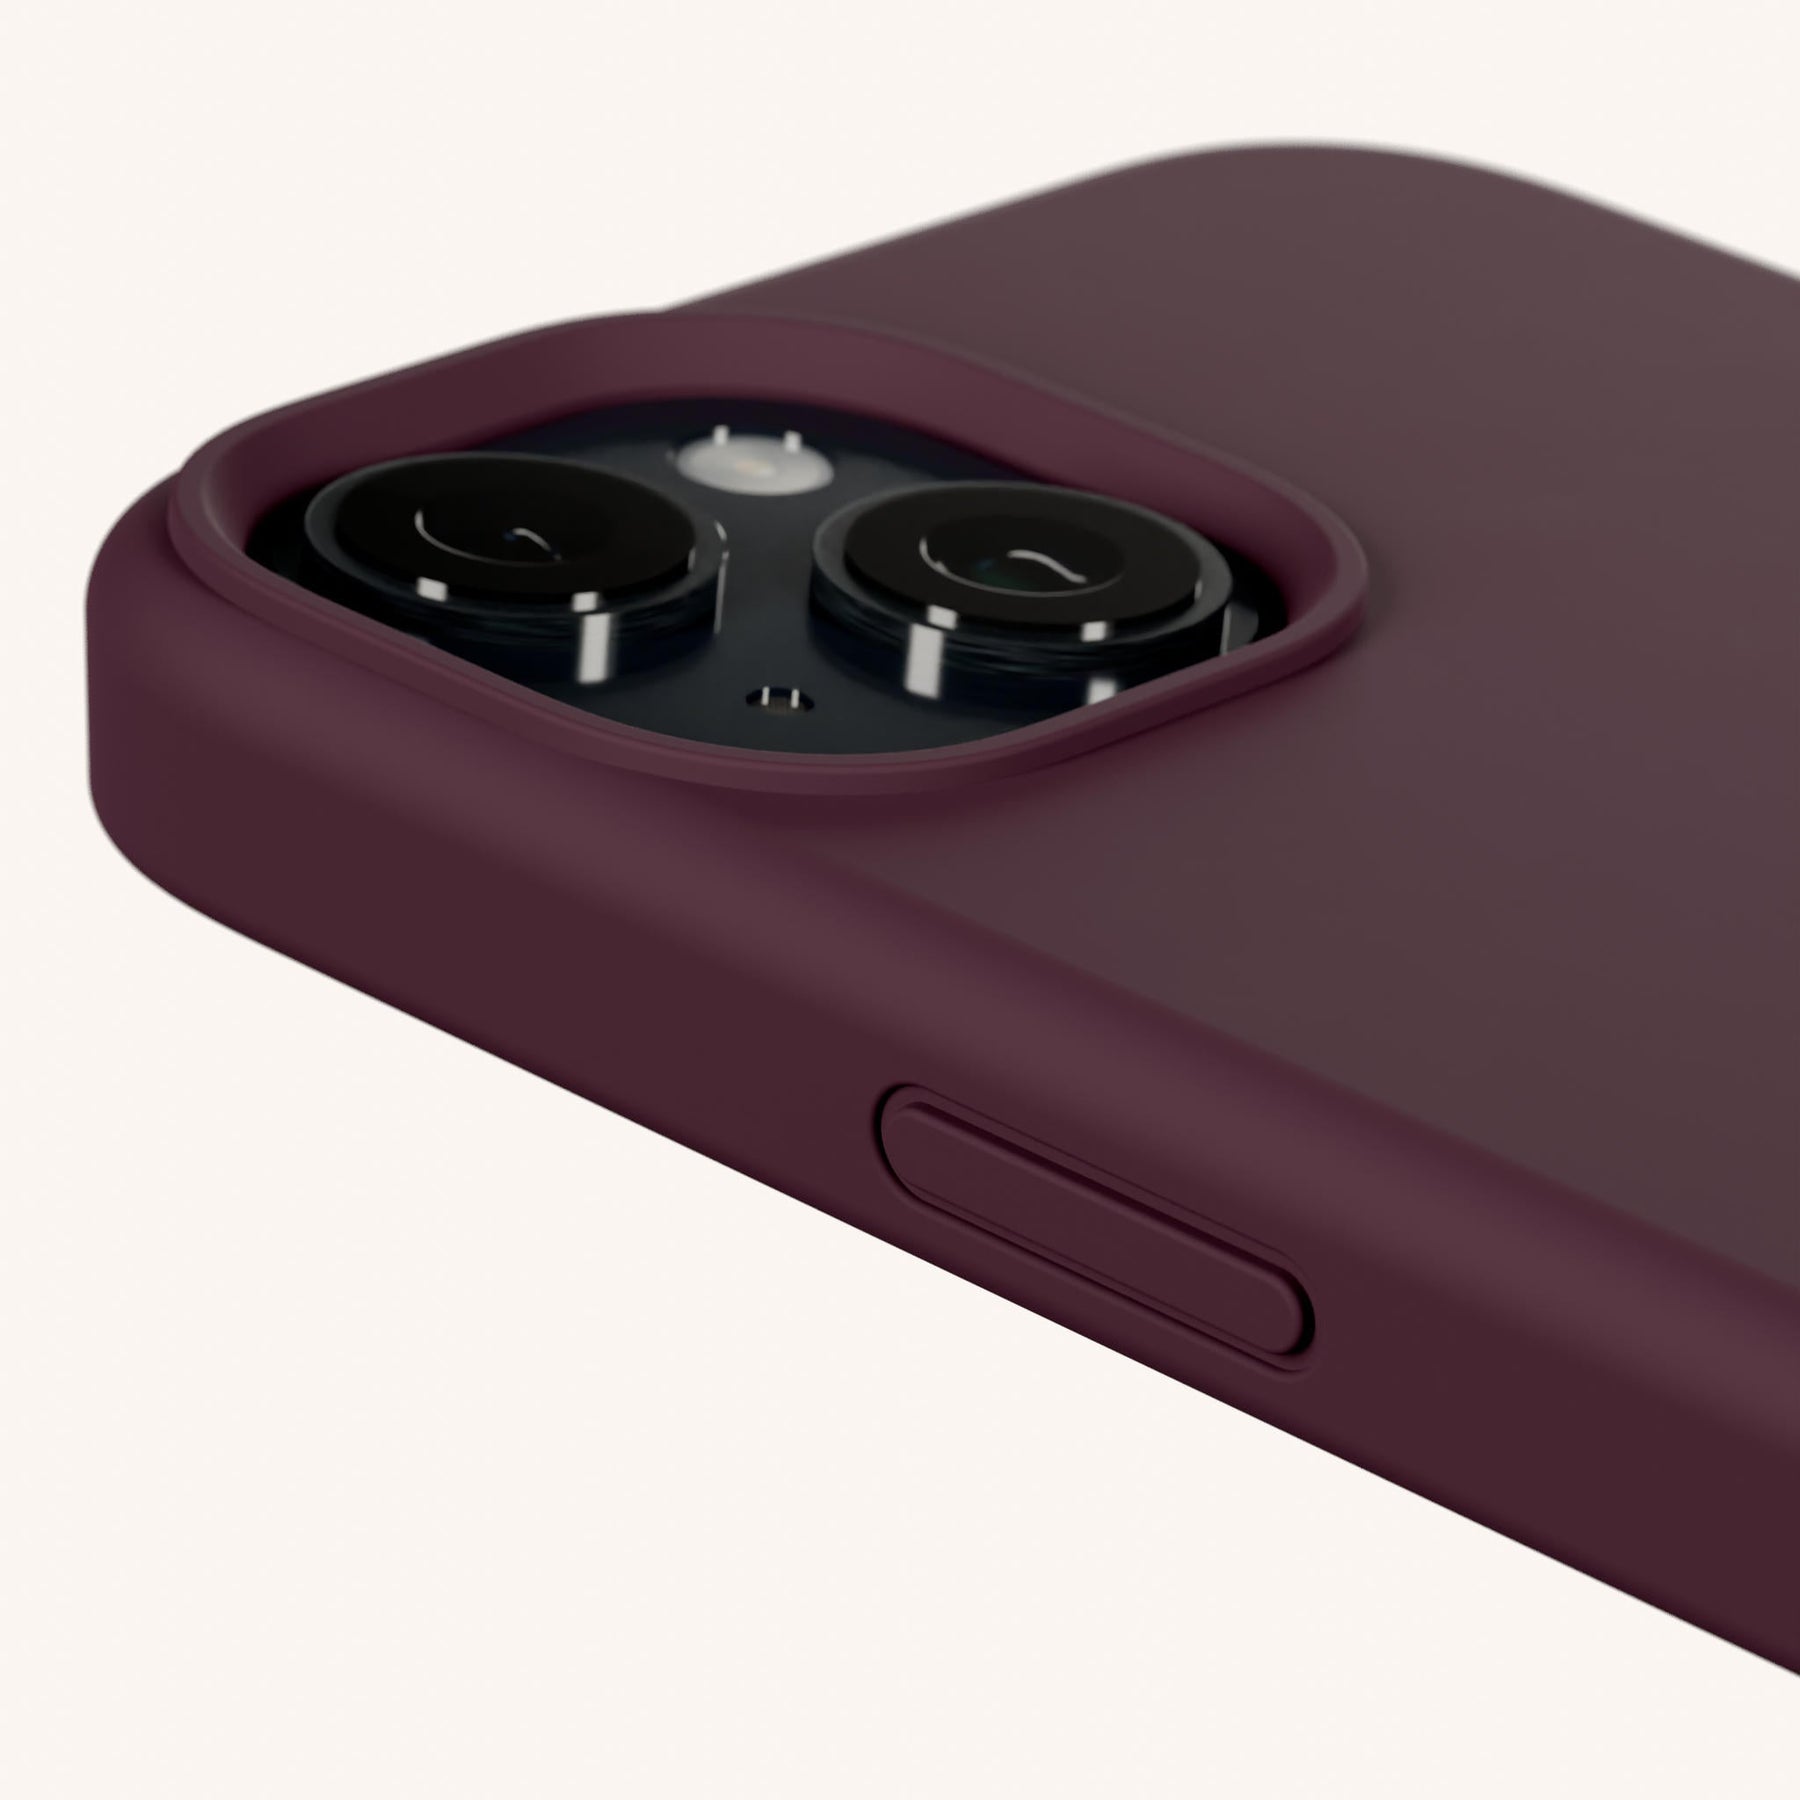 Phone Case with Eyelets in Burgundy